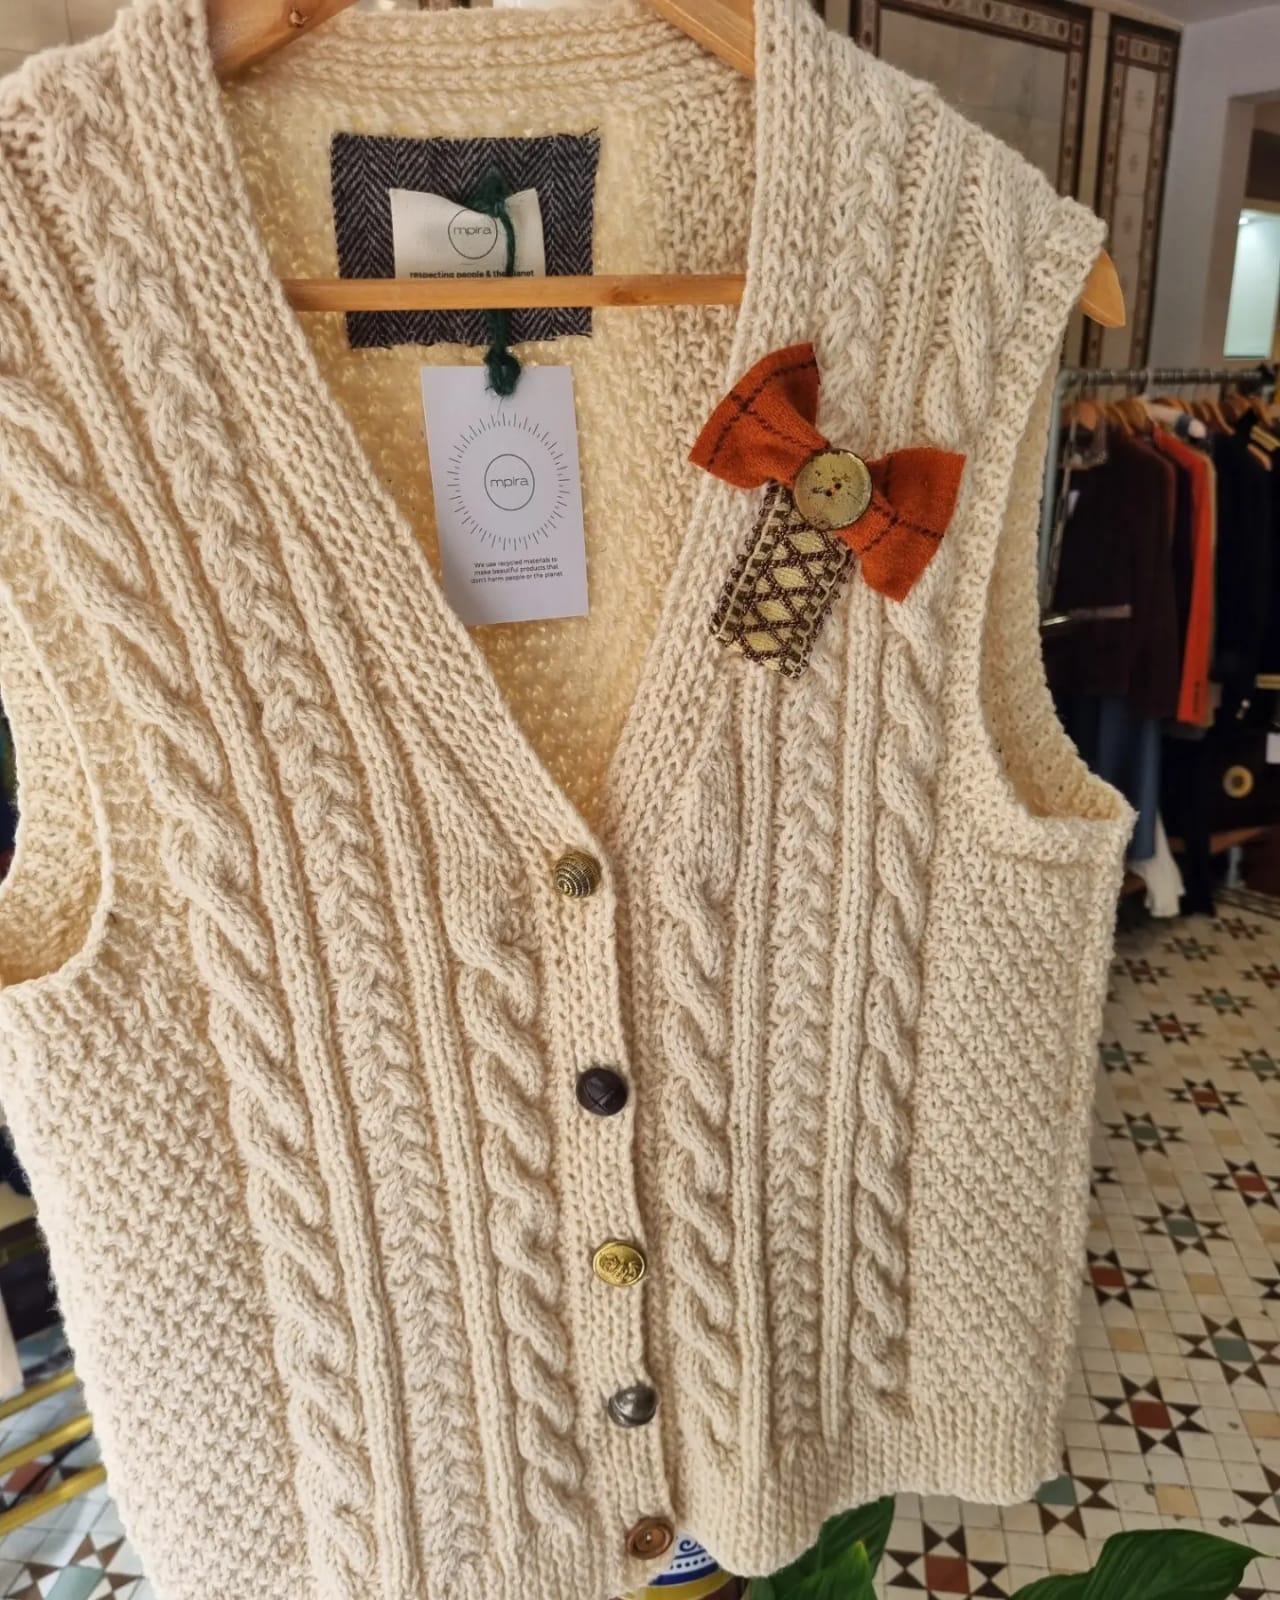 A Knitwear Hand Knitted Wool Upcycled Waistcoat from mpira.